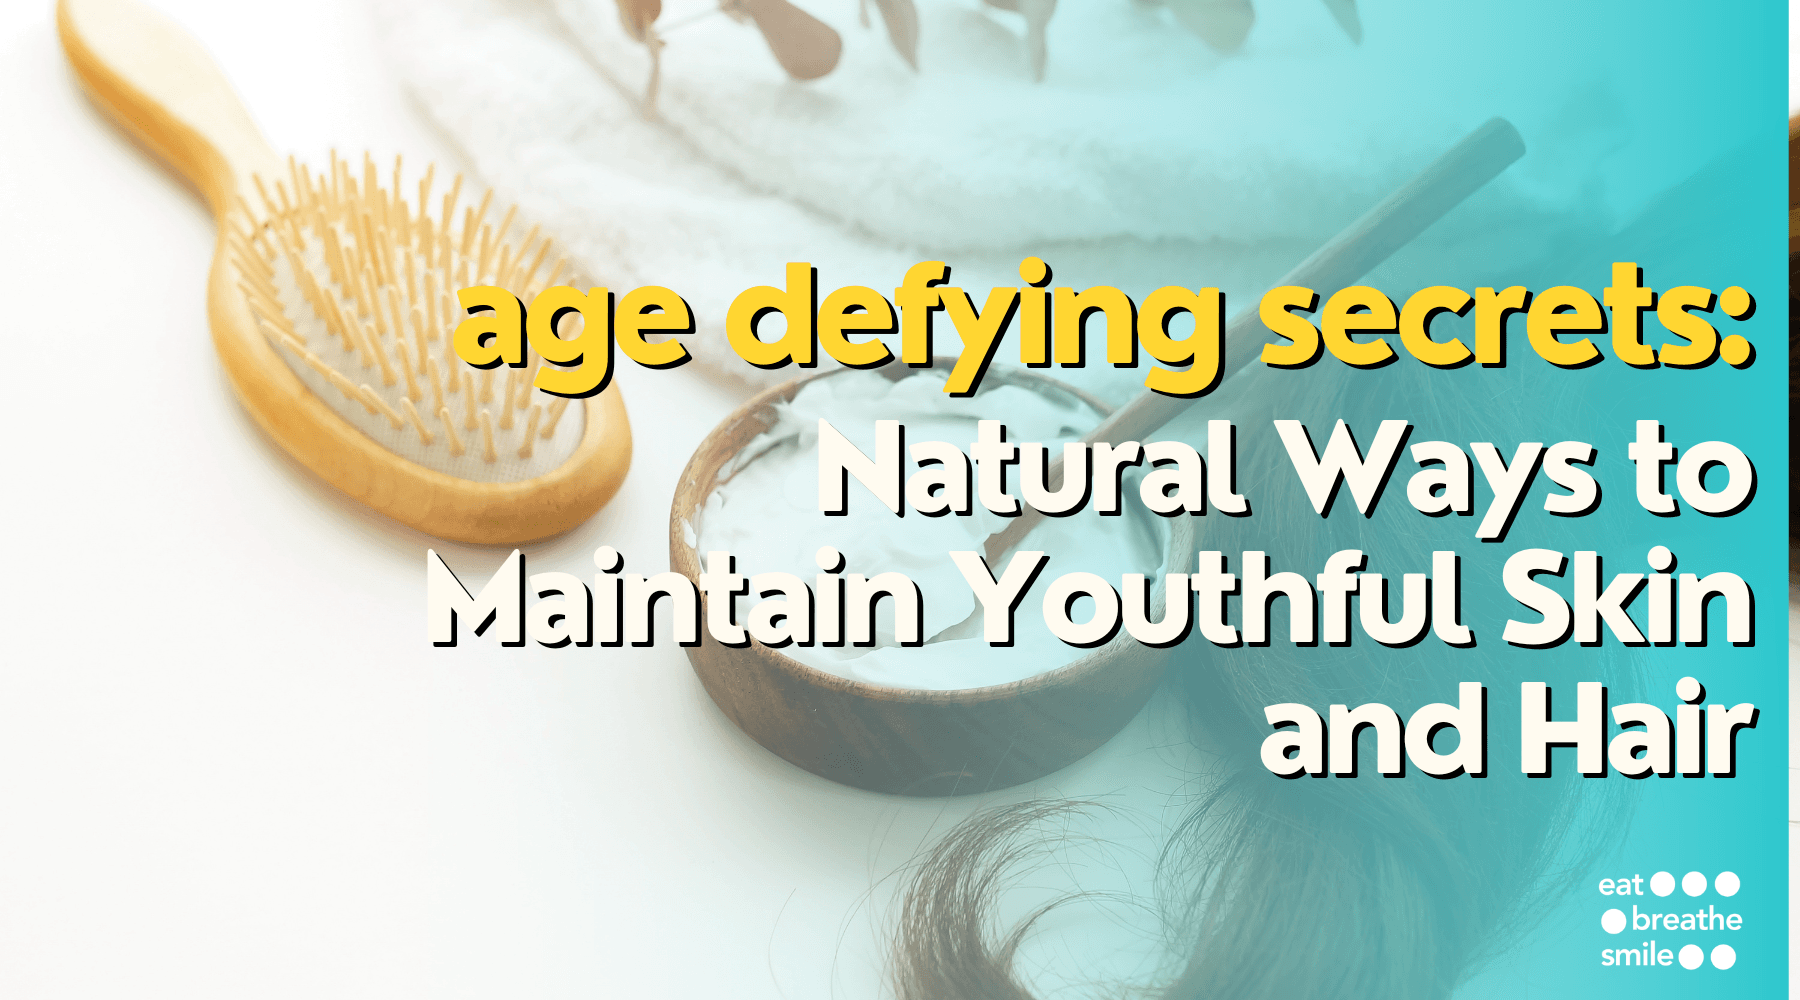 Natural Ways to Maintain Youthful Skin and Hair